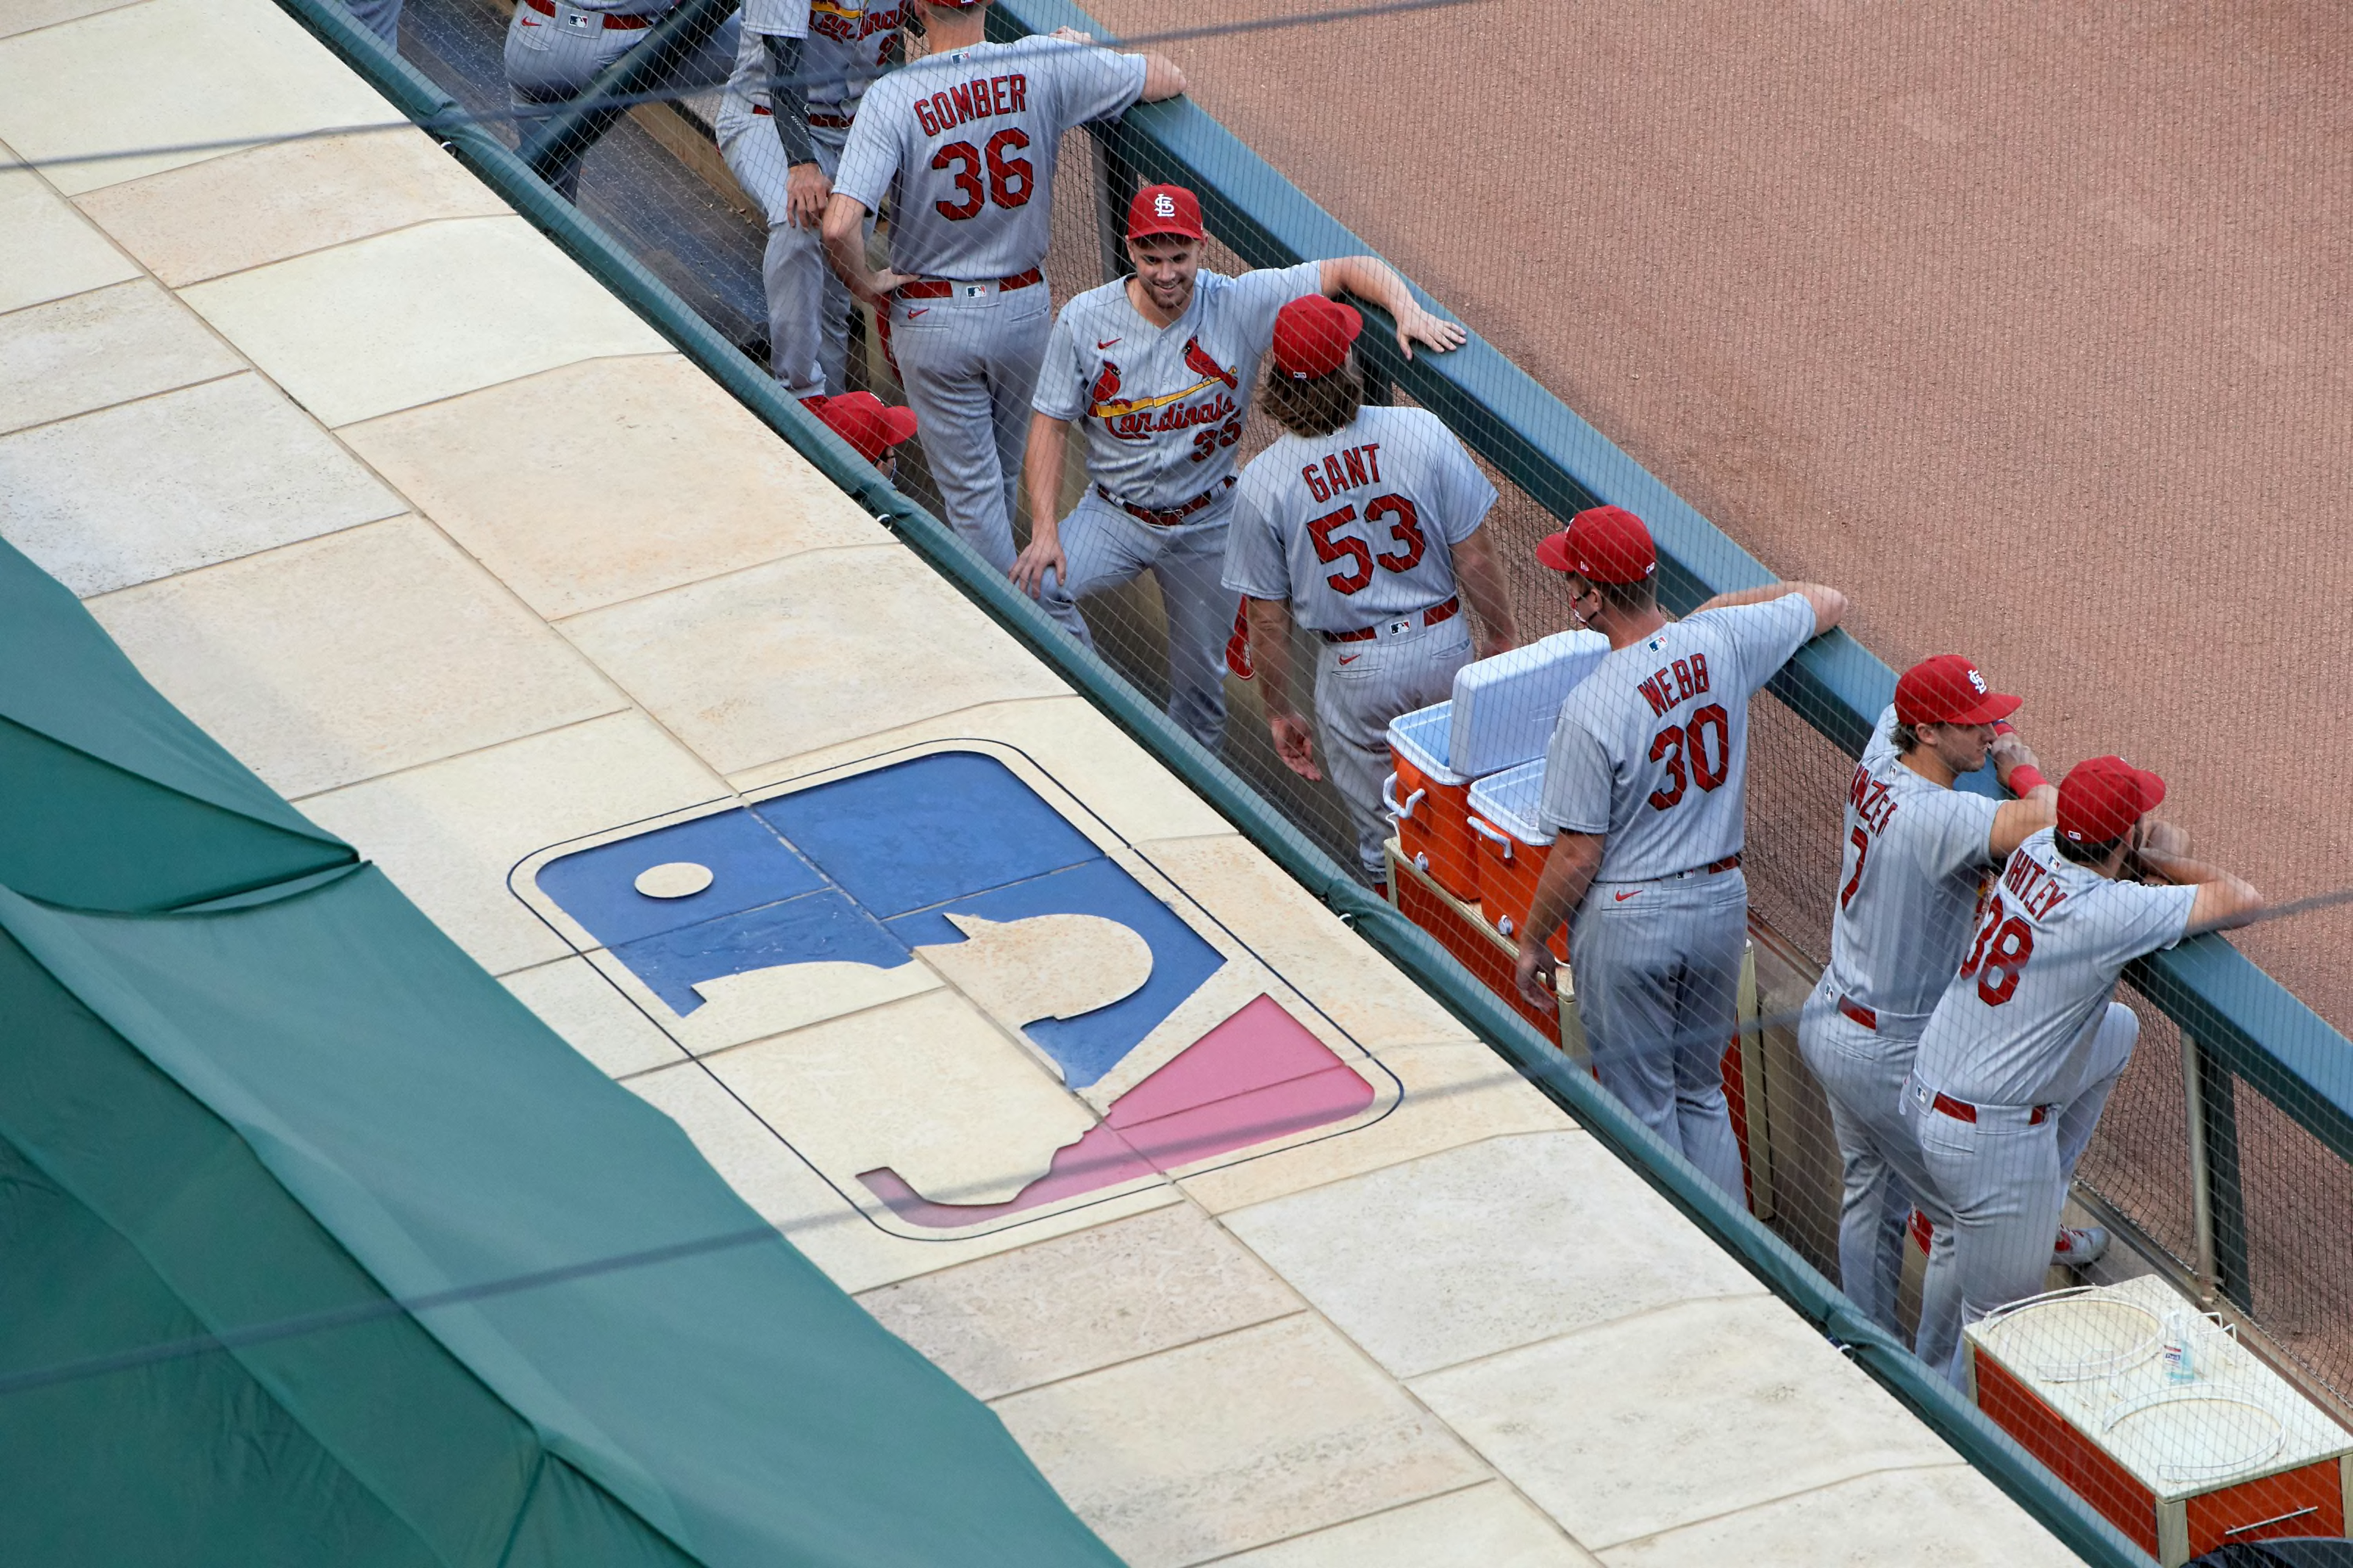 Possible next men up for the St. Louis Cardinals amid COVID-19 outbreak - Page 2